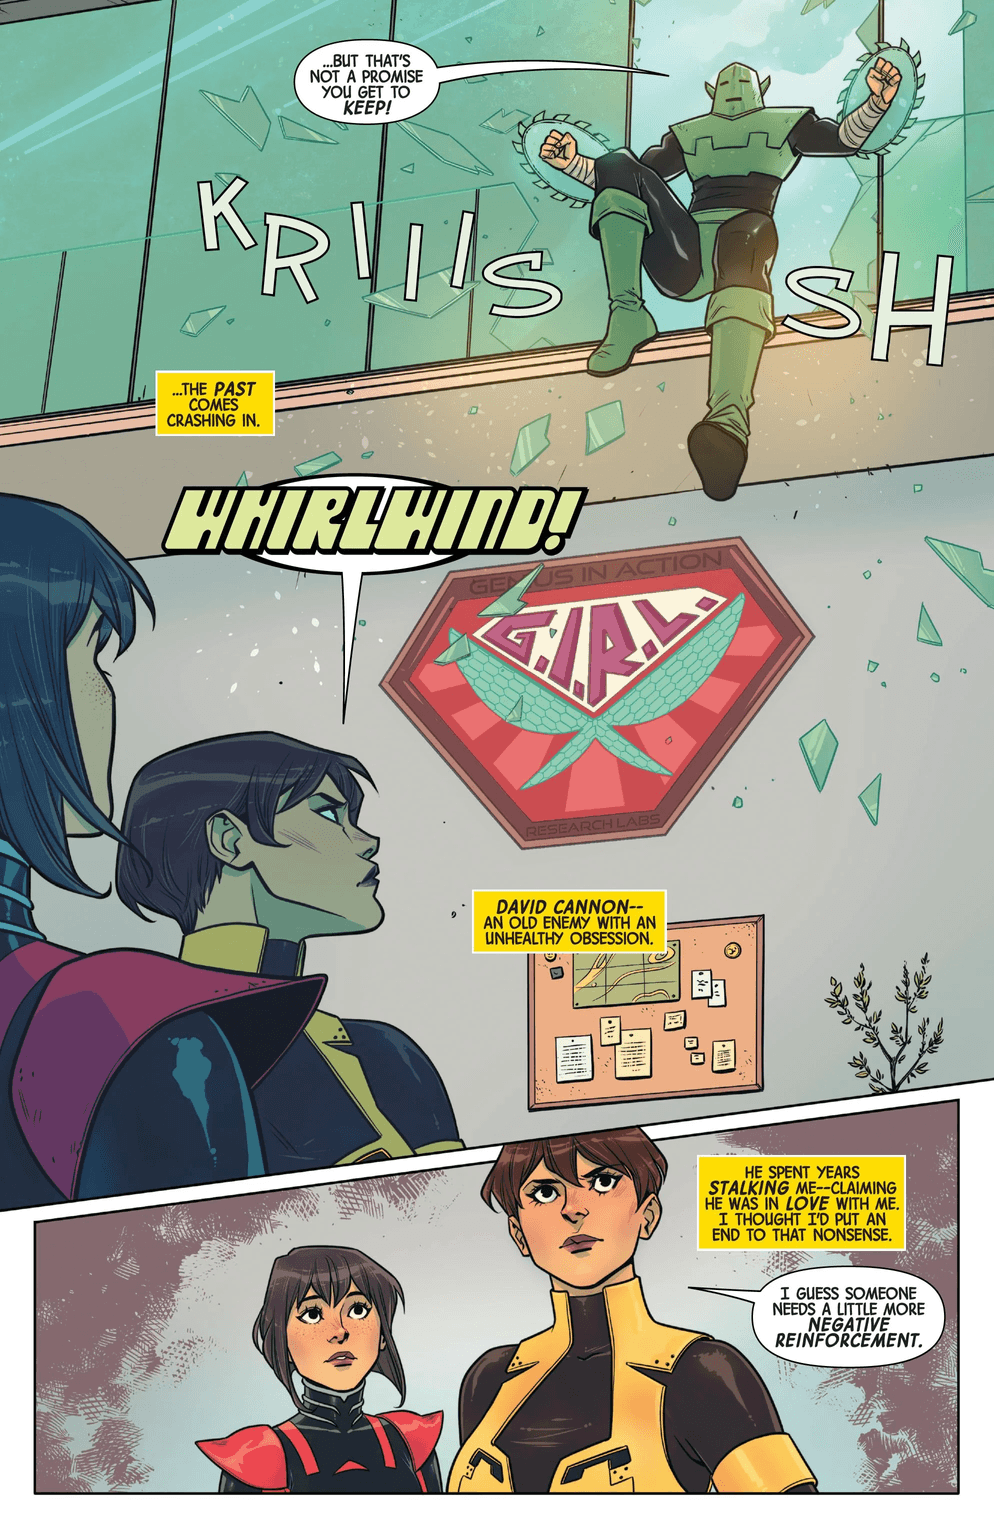 WASP (2023) #1 page by Al Ewing and Kasia Nie